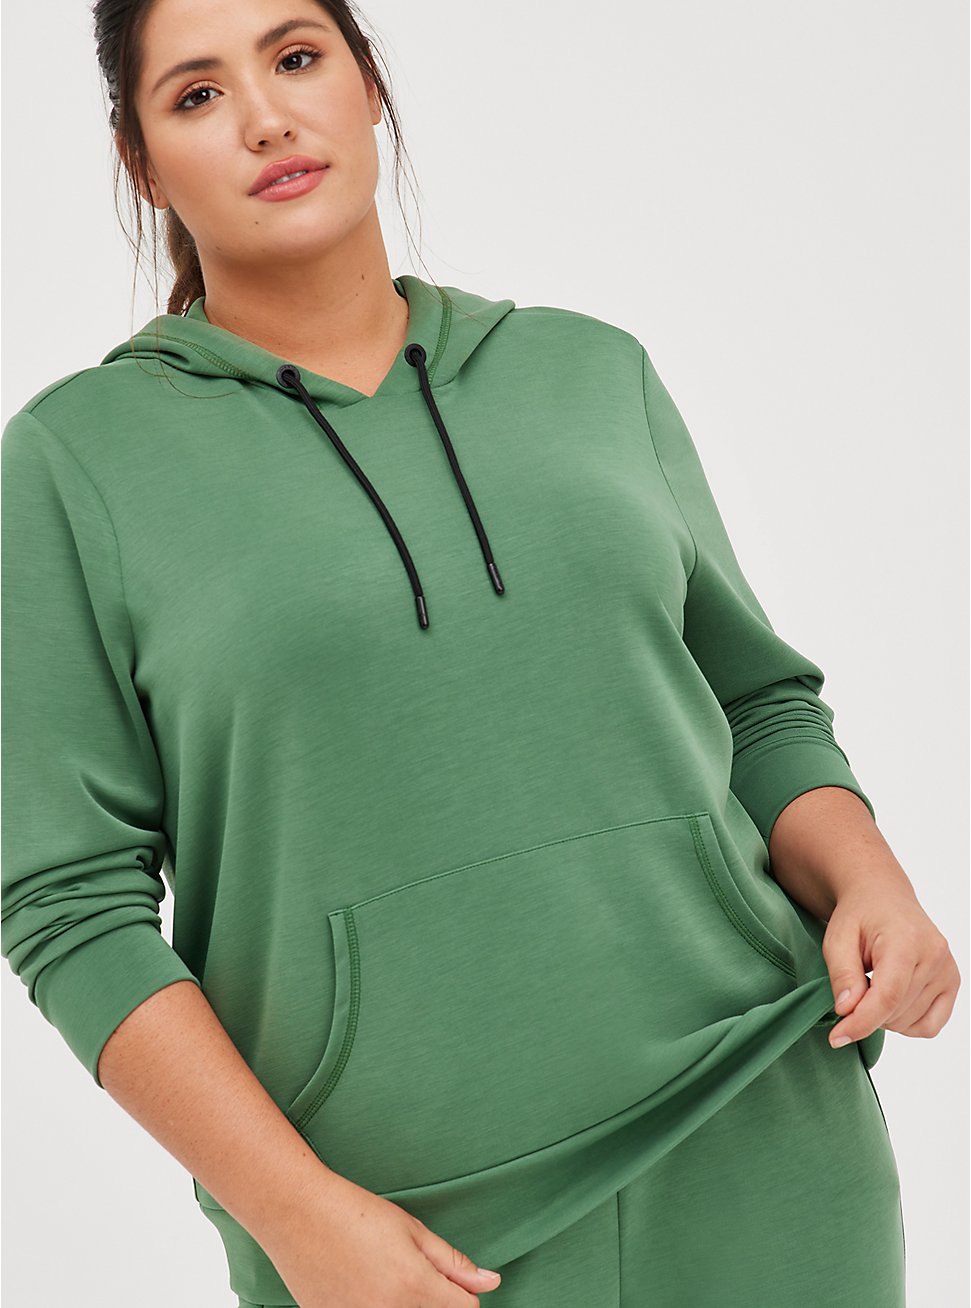 Plus Size Active Hoodie - Cupro Green, OLIVE, hi-res